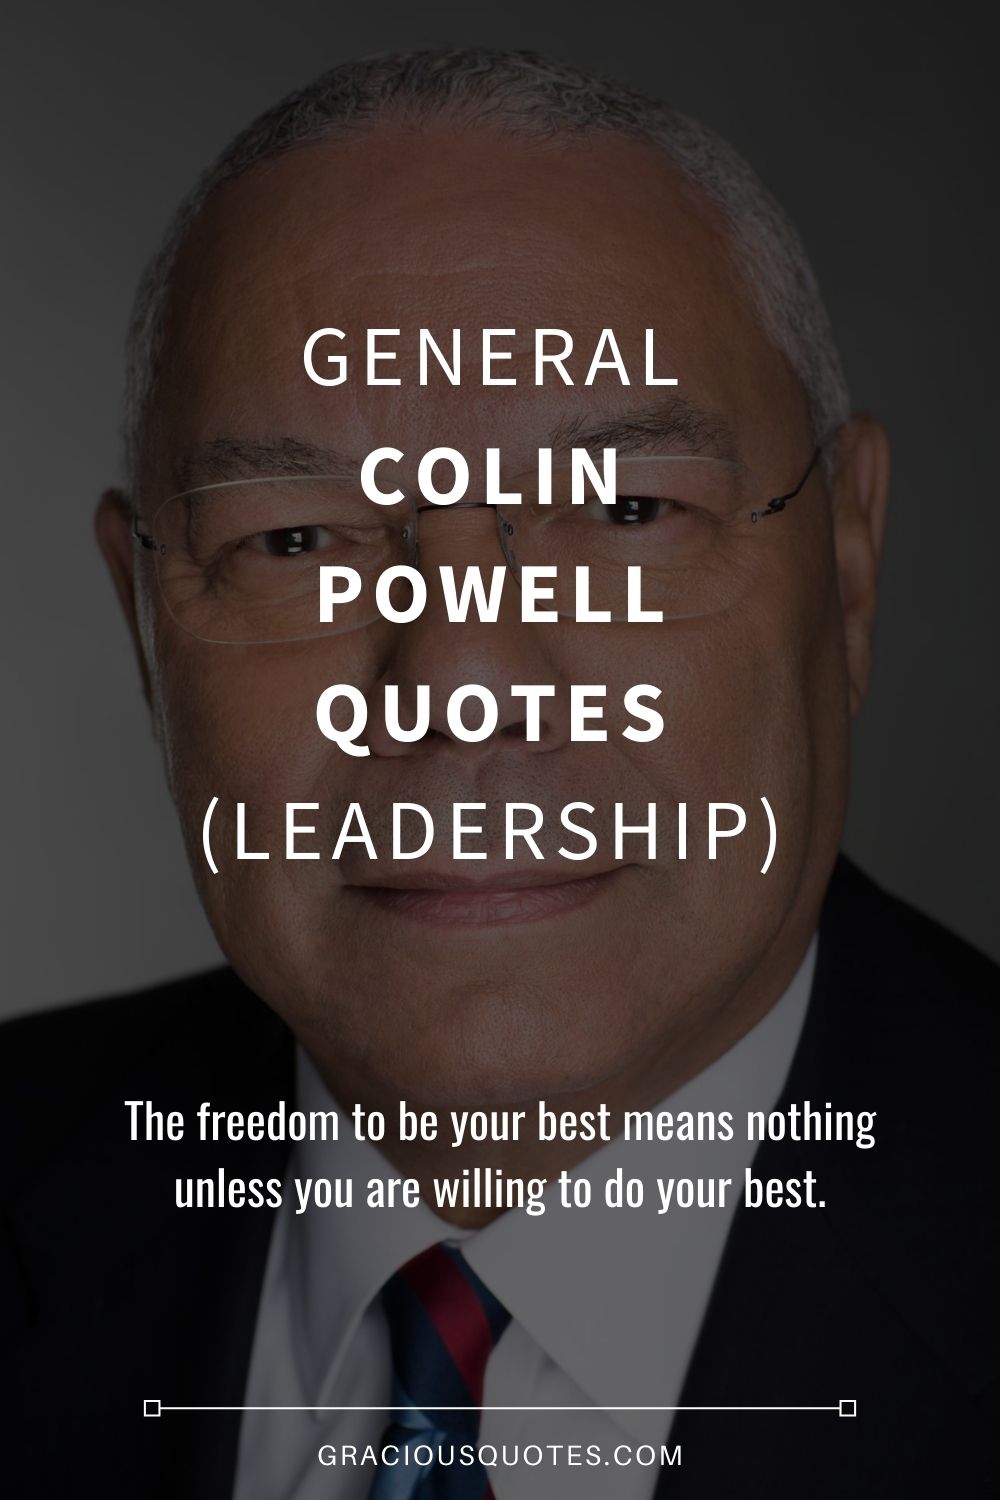 General Colin Powell Quotes (LEADERSHIP) - Gracious Quotes